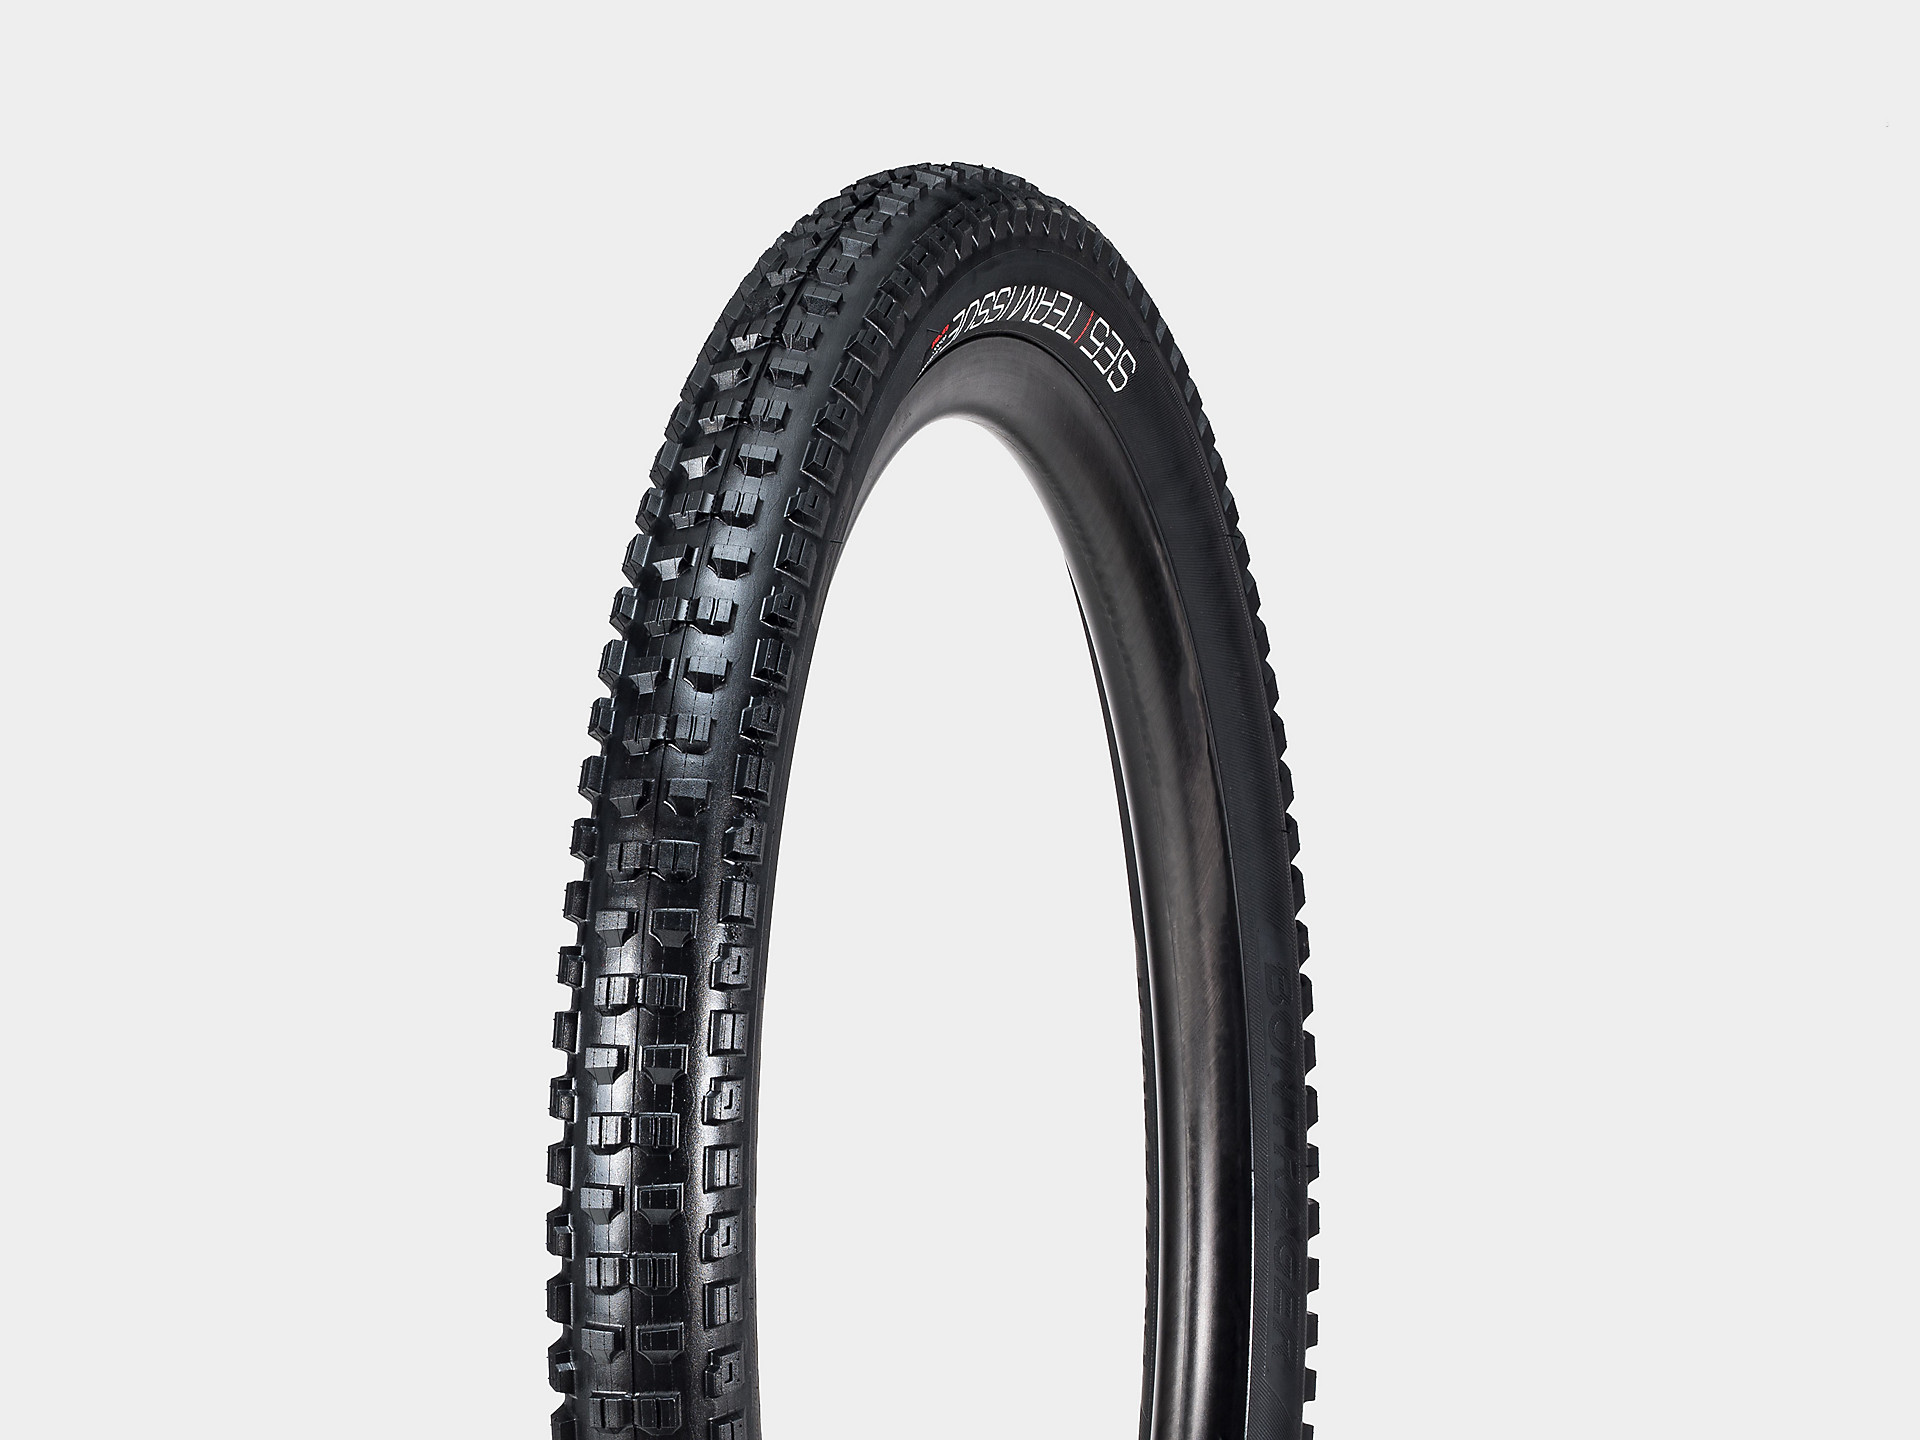 GIANT 27.5x2.35" Sycamore Trail 1 Tubeless Ready TLR MTB  Mountain Bike Tires 